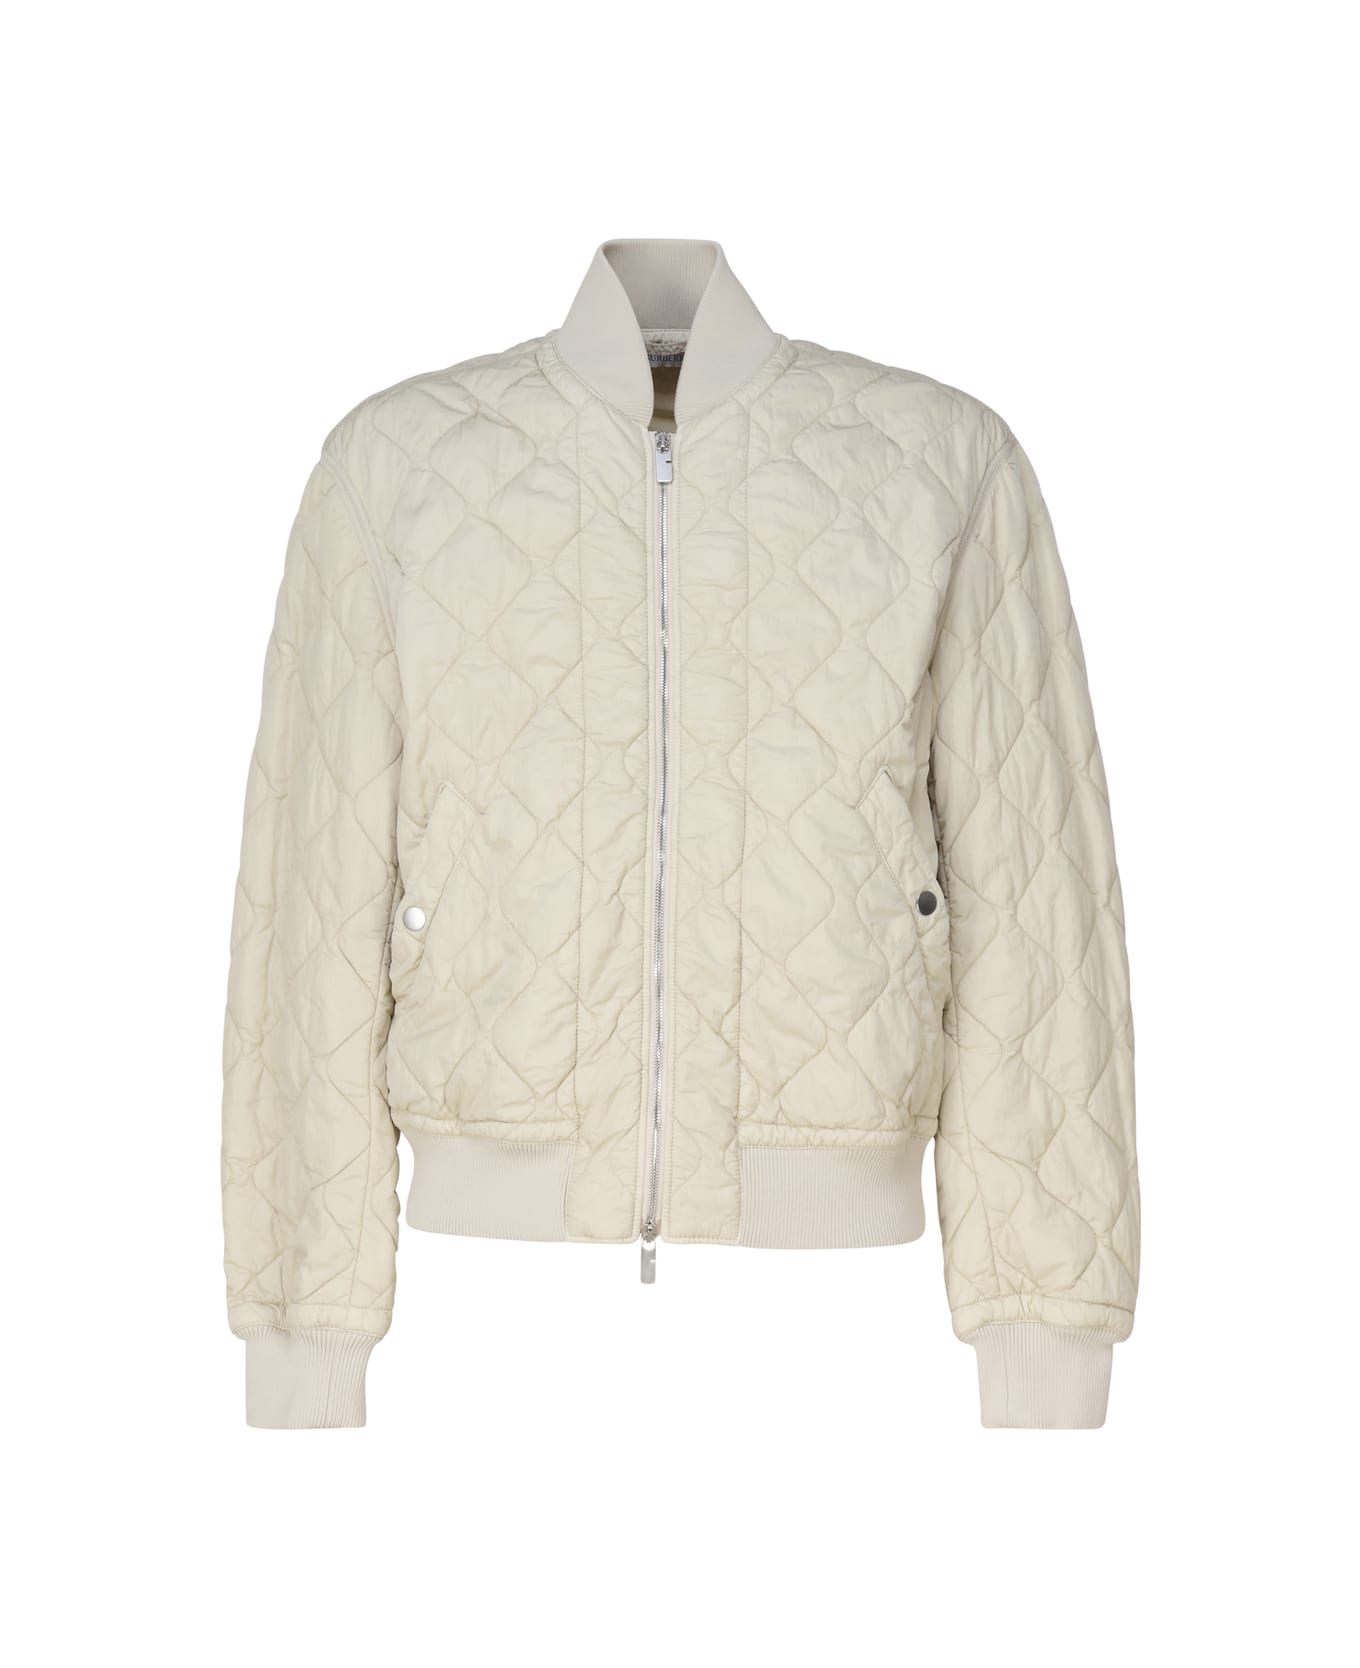 Burberry Quilted Nylon Bomber Jacket - Soap